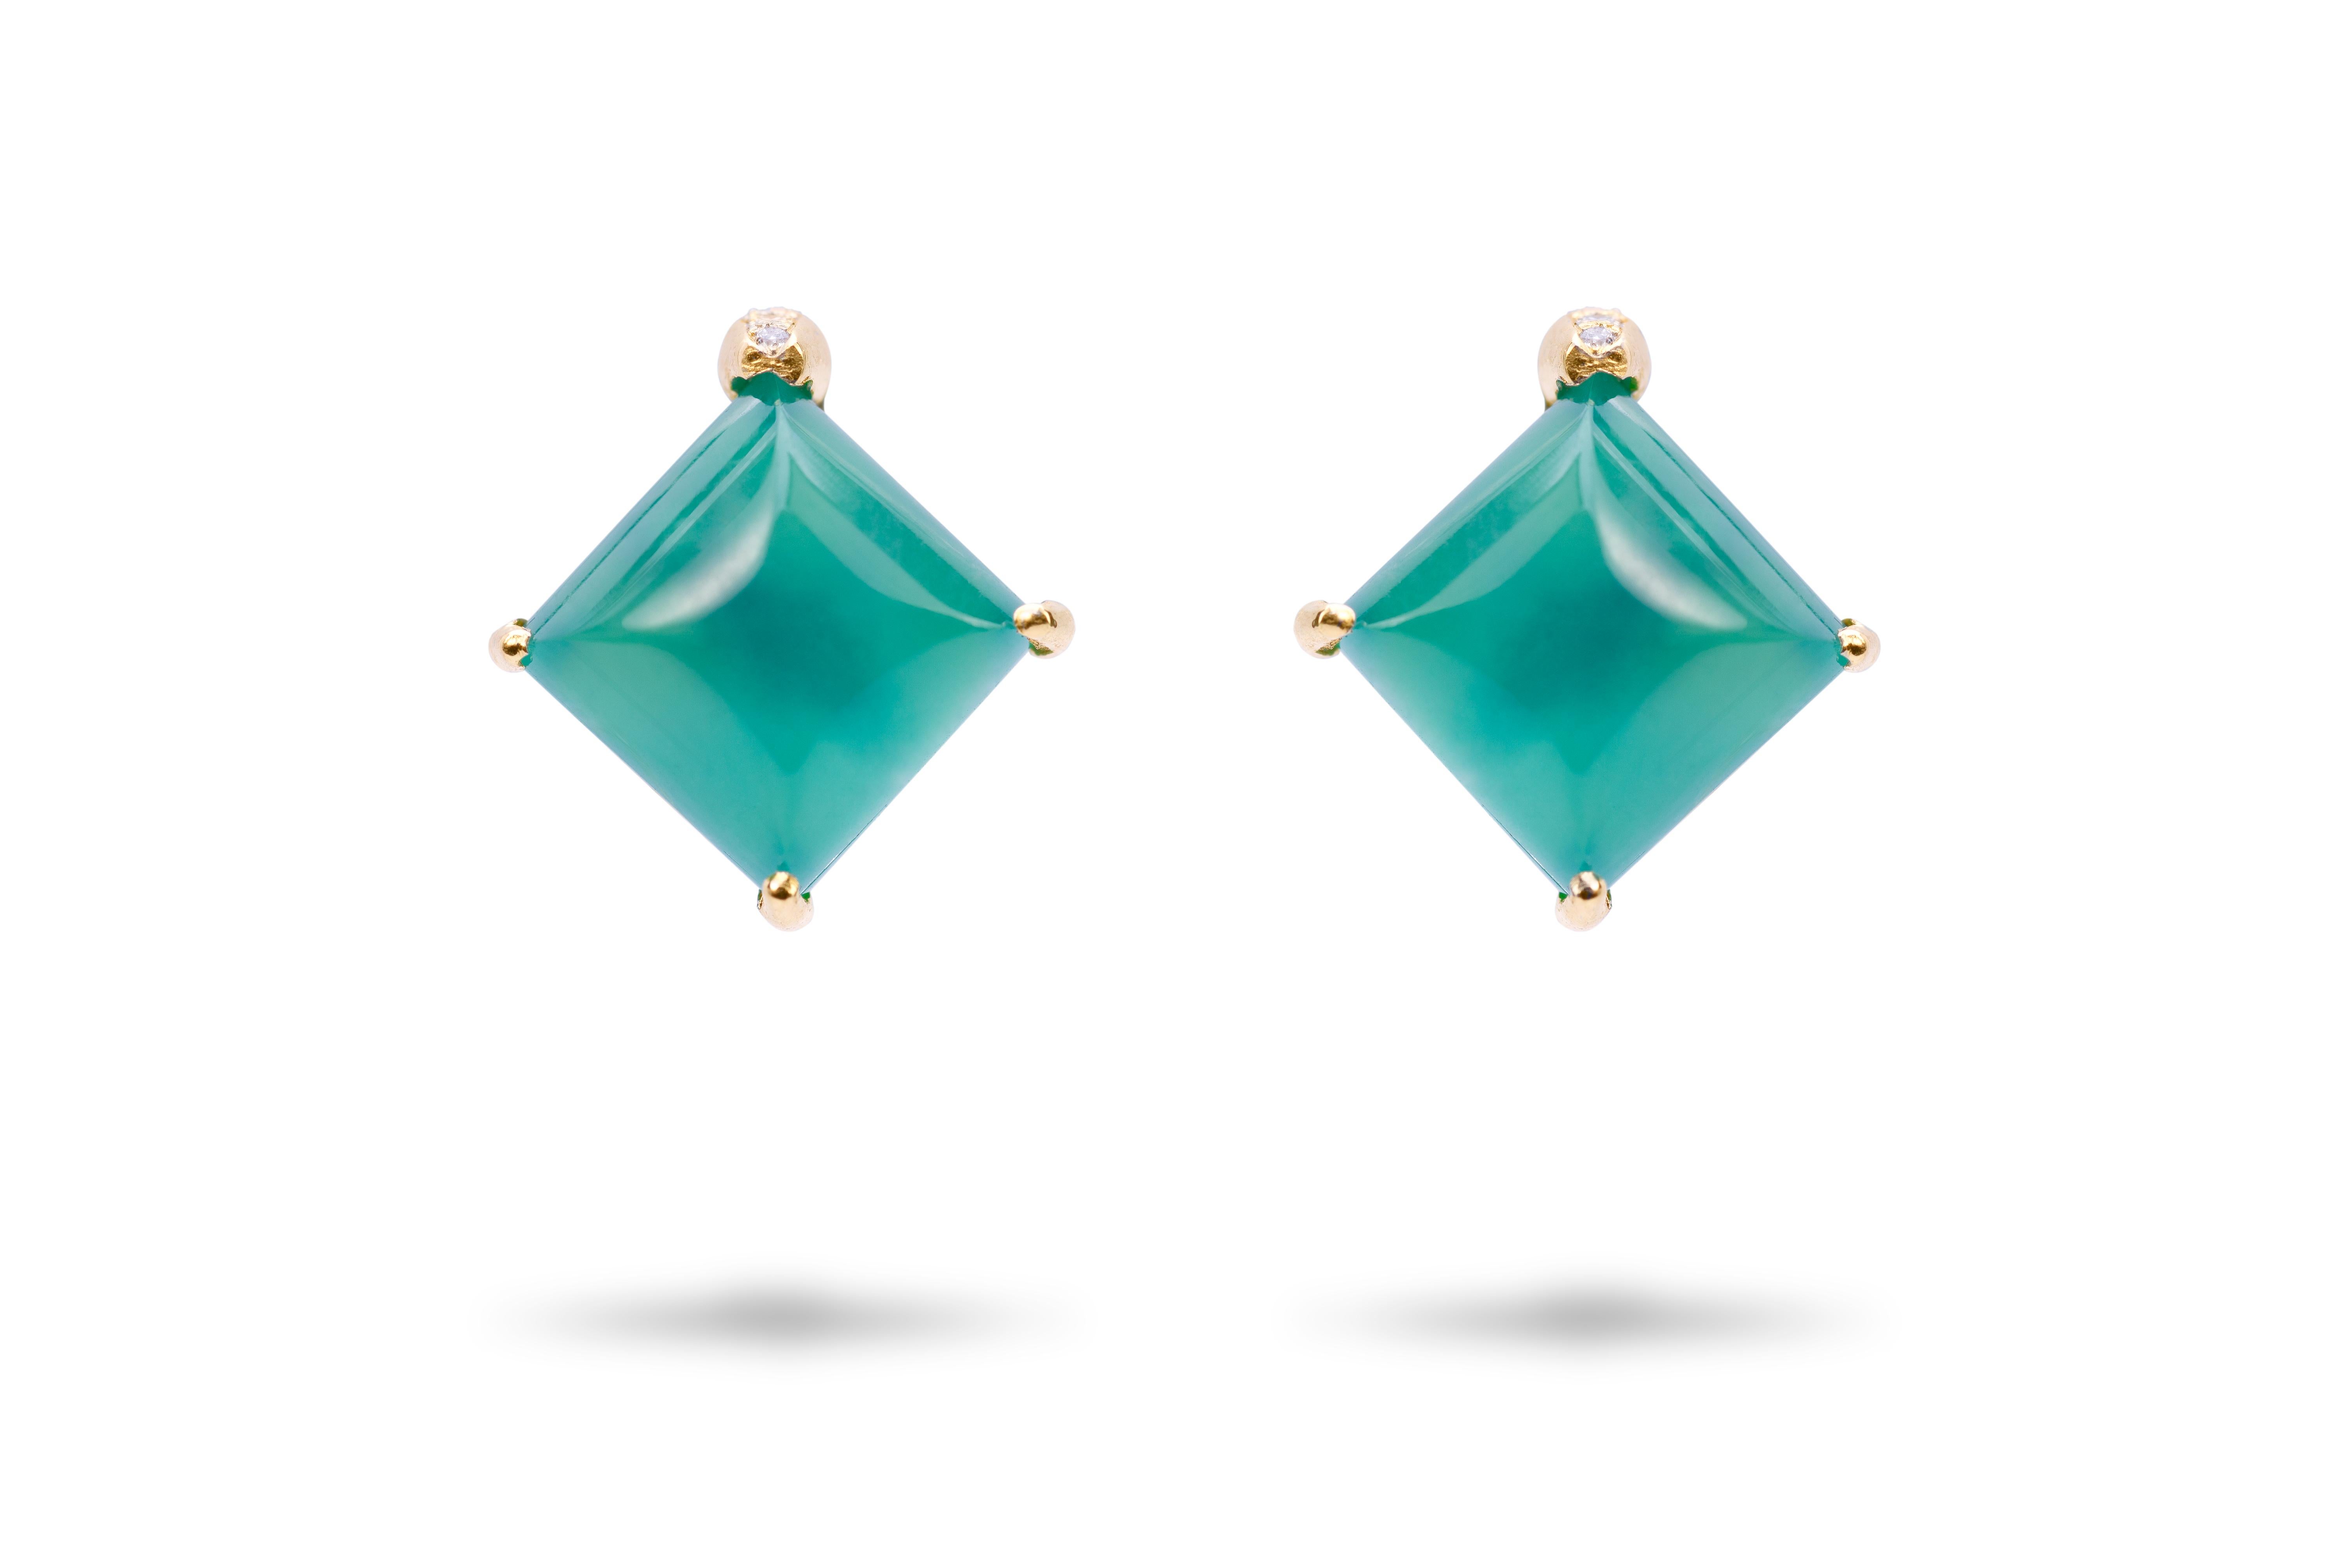 Rossella Ugolini Design Collection 18 Carat Yellow Gold White Diamonds Green Agate Rock Crystal Stud Design Earring.
Stunning green stud earrings handcrafted in Italy .
dimension H 1 cm x W 0.6 mm
H. 39  in x W. 2.6 in
A beautiful pair of Art Deco